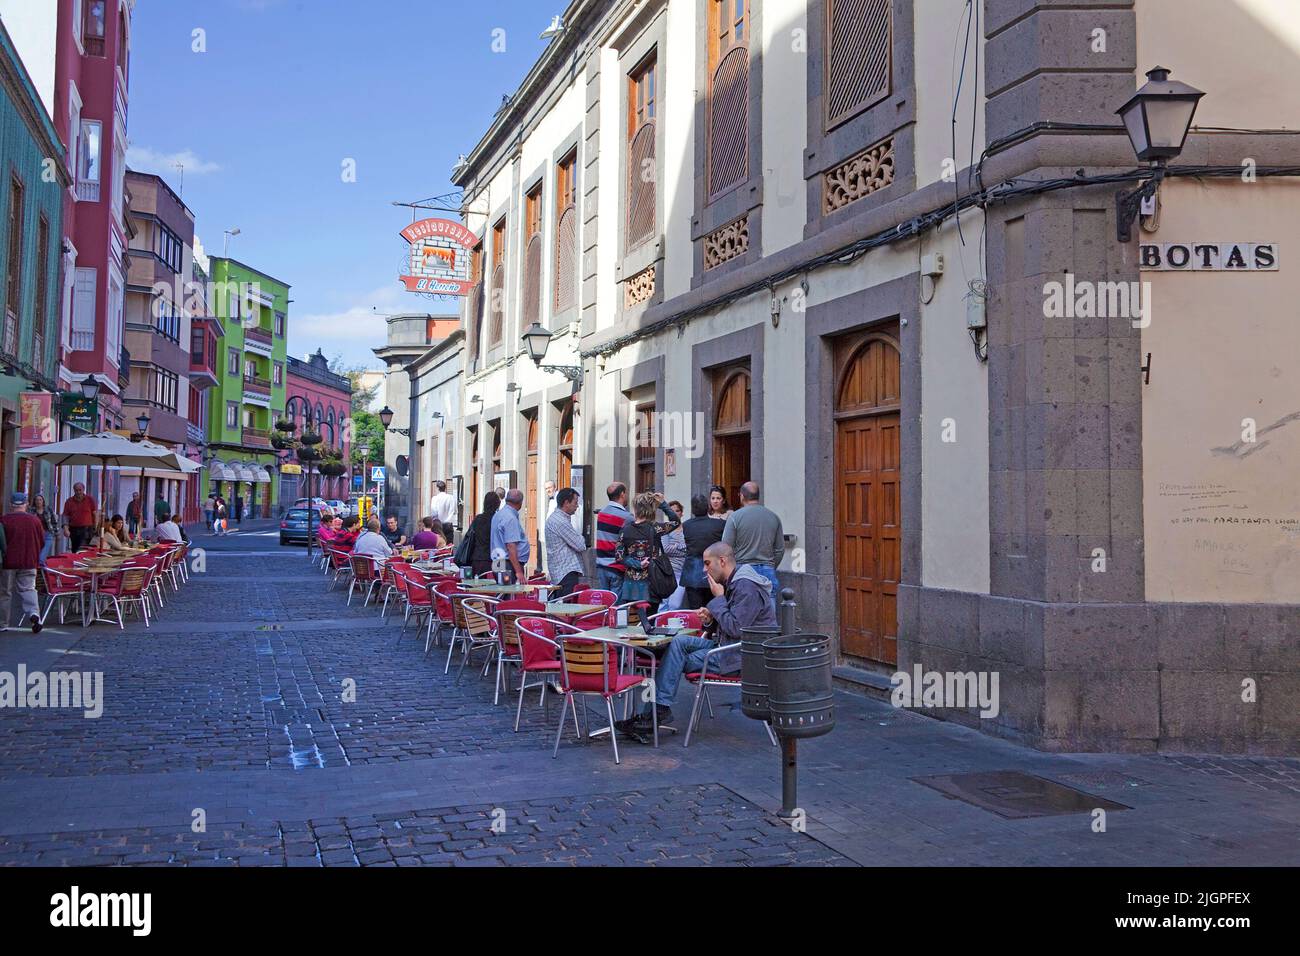 Street coffee sand restaurants in a alley, old town Vegueta, Las Palmas, Grand Canary, Canary islands, Spain, Europe Stock Photo